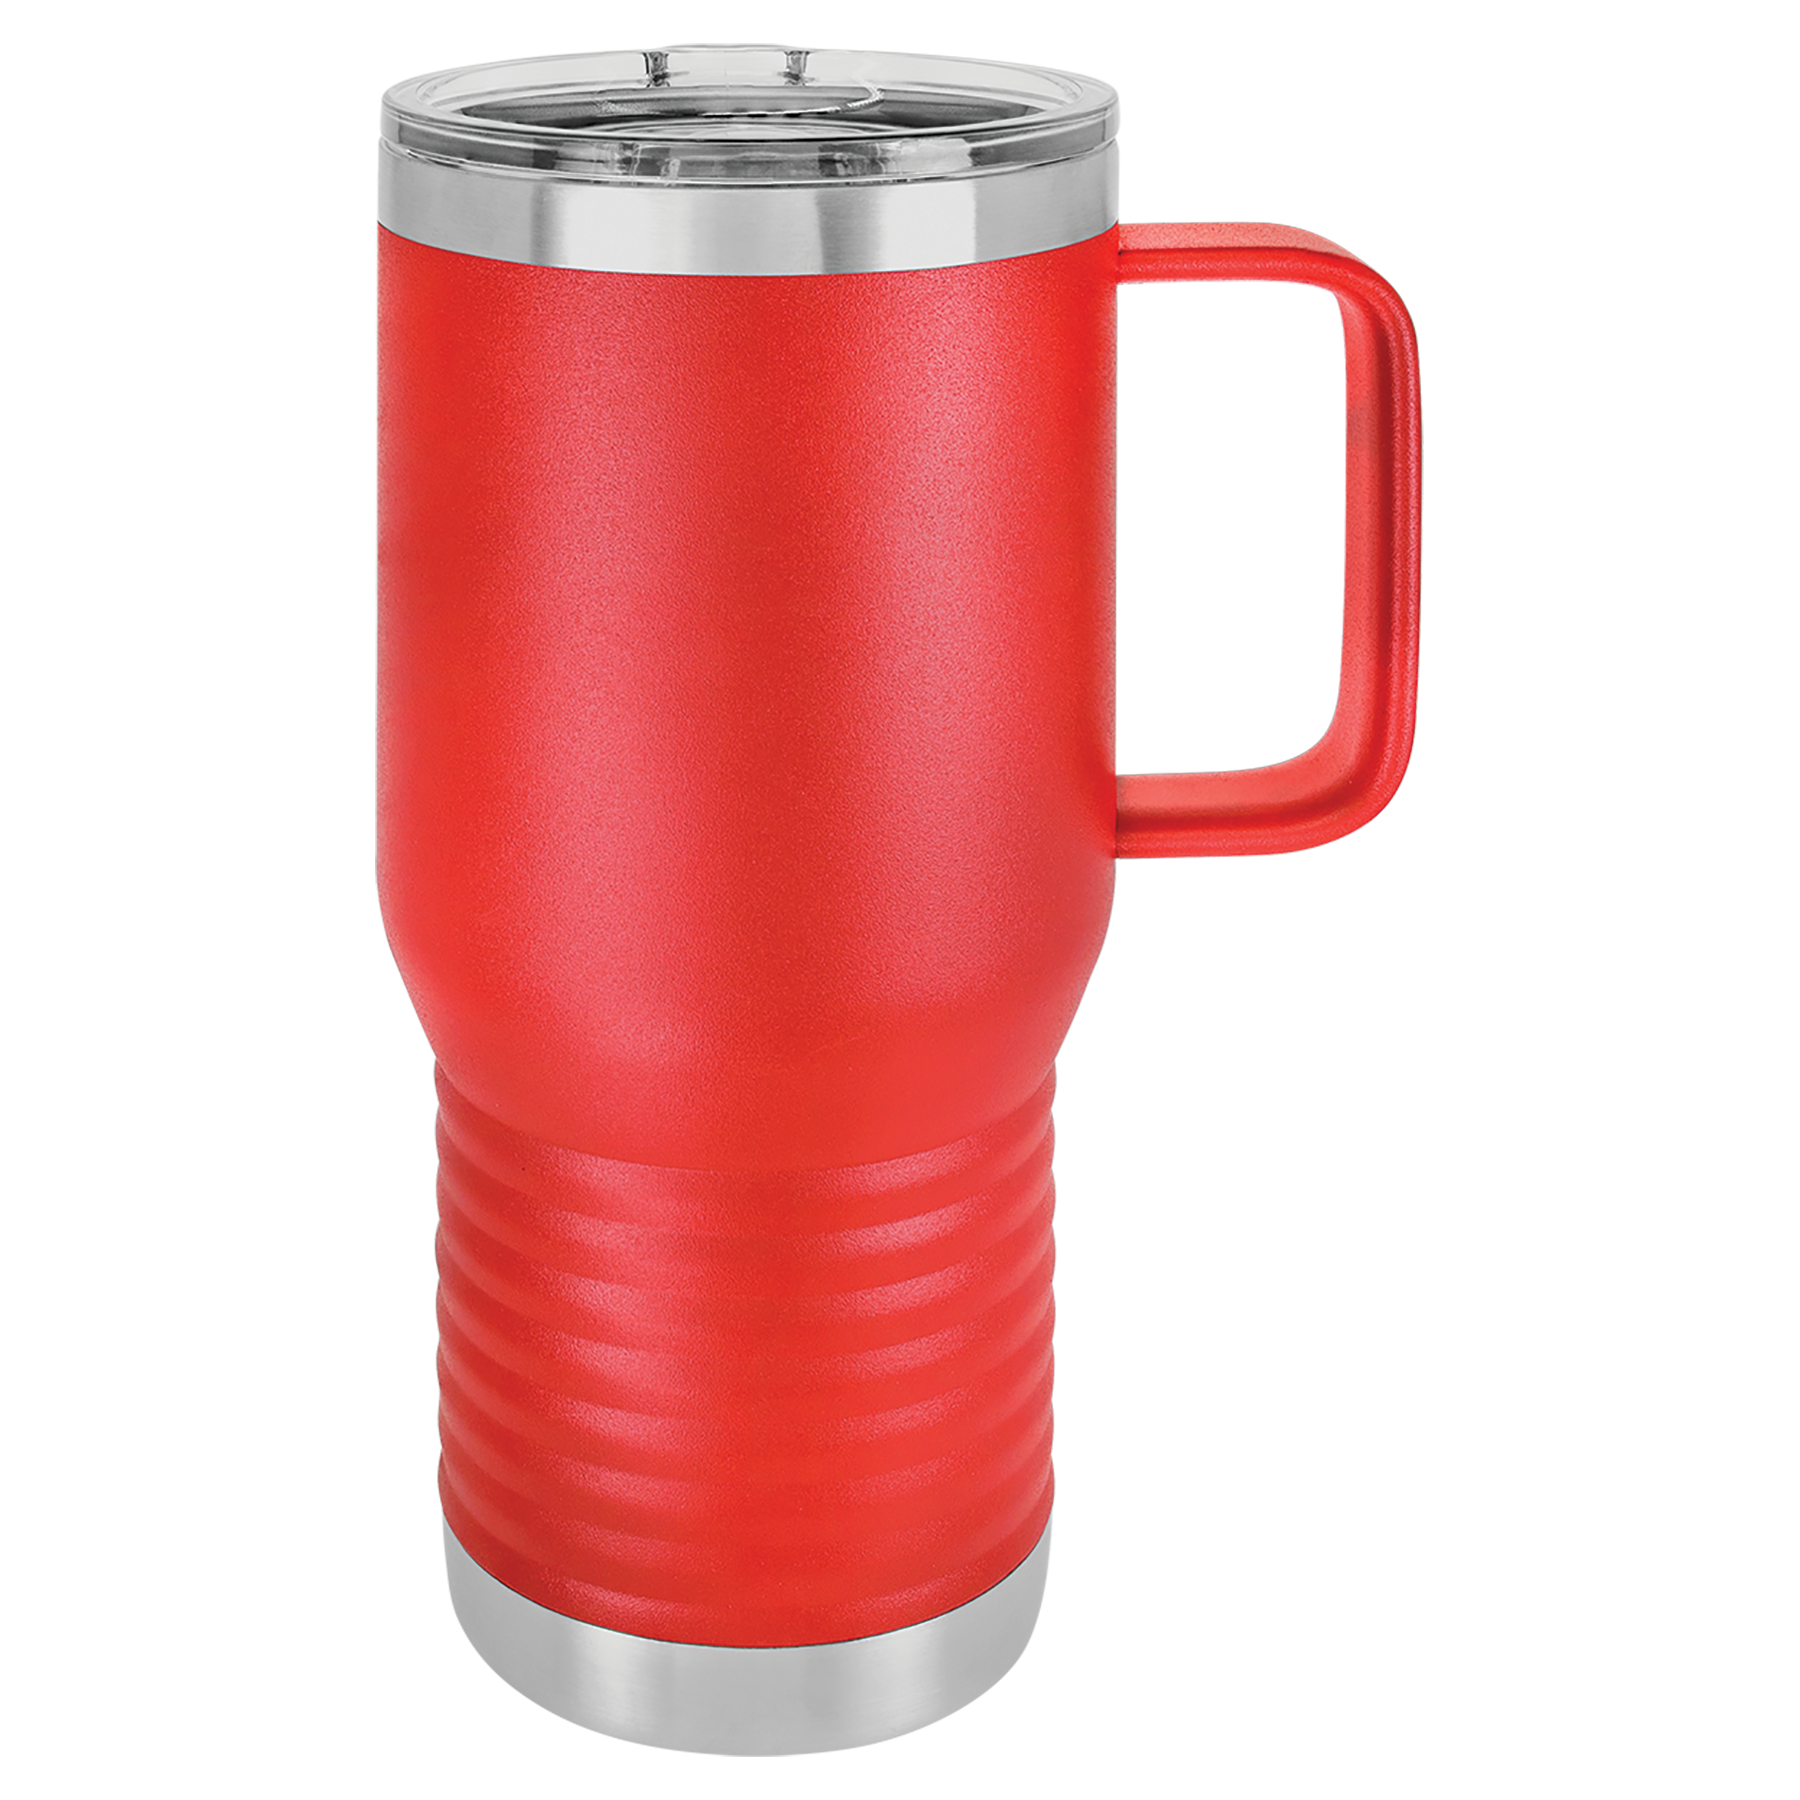 Red 20oz Travel Mug -One Free Engraving -Fits most Cup Holders -Double-wall Vacuum Insulated -Made from 18/8 Gauge Stainless Steel (Type 304 Food Grade) -Lid is BPA Free (Hand Wash Only) -Not recommended for Dishwasher -Works with Cold and Hot Drinks -18 Color Options -Perfect for Personalized Gifts, Awards, Incentives, Swag & Fundraisers